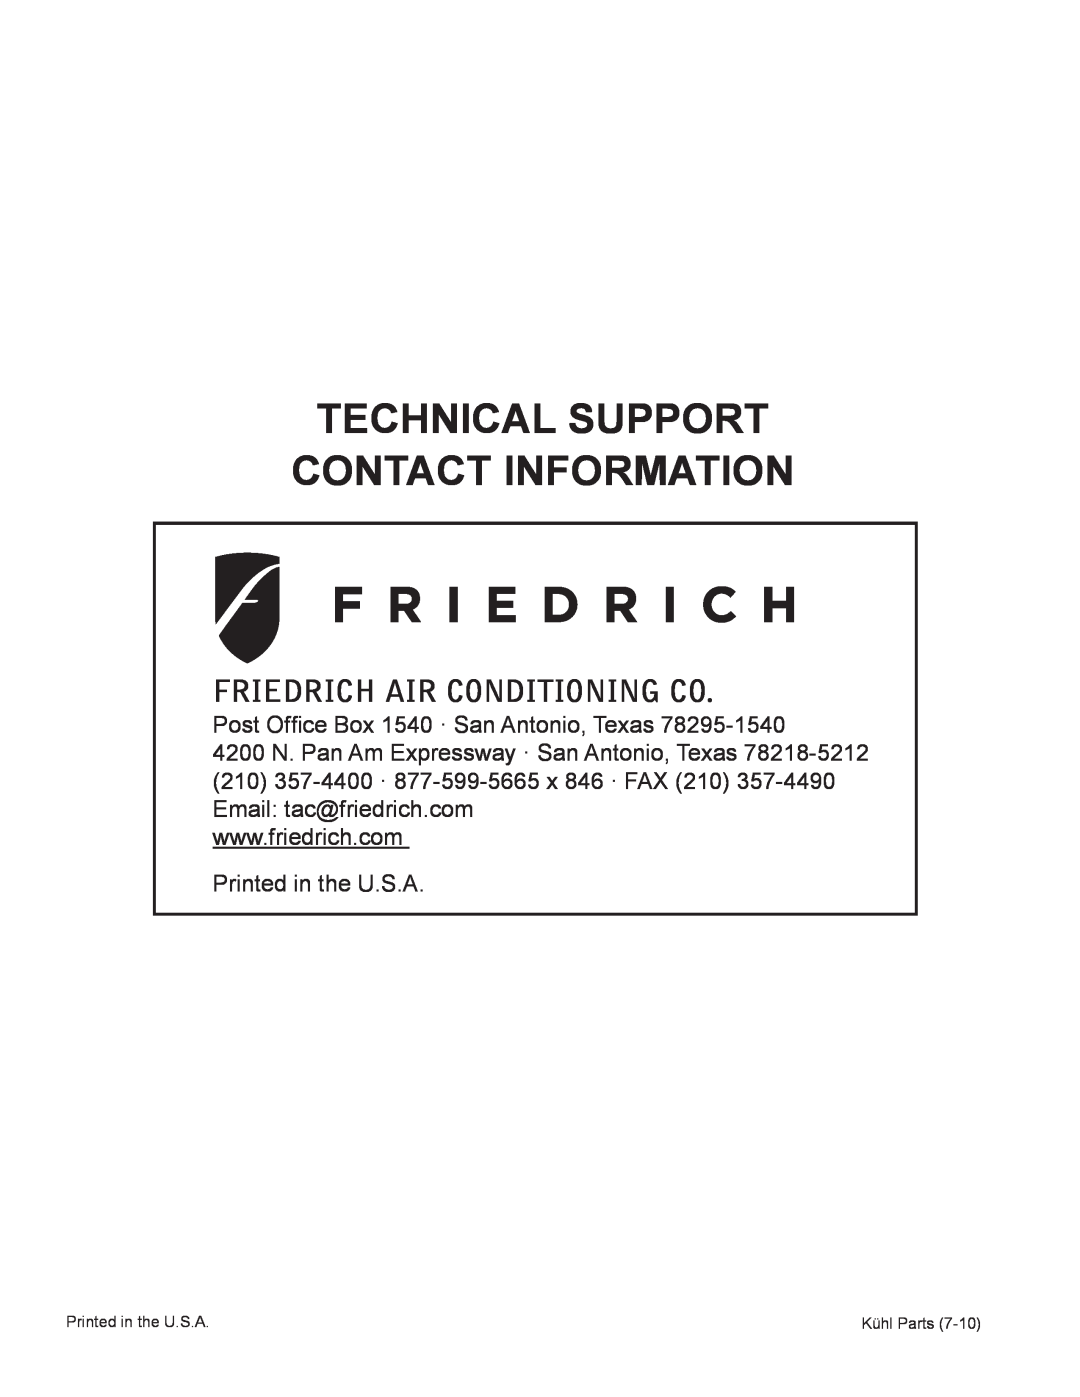 Friedrich R-410A manual Technical Support Contact Information, Friedrich Air Conditioning Co 